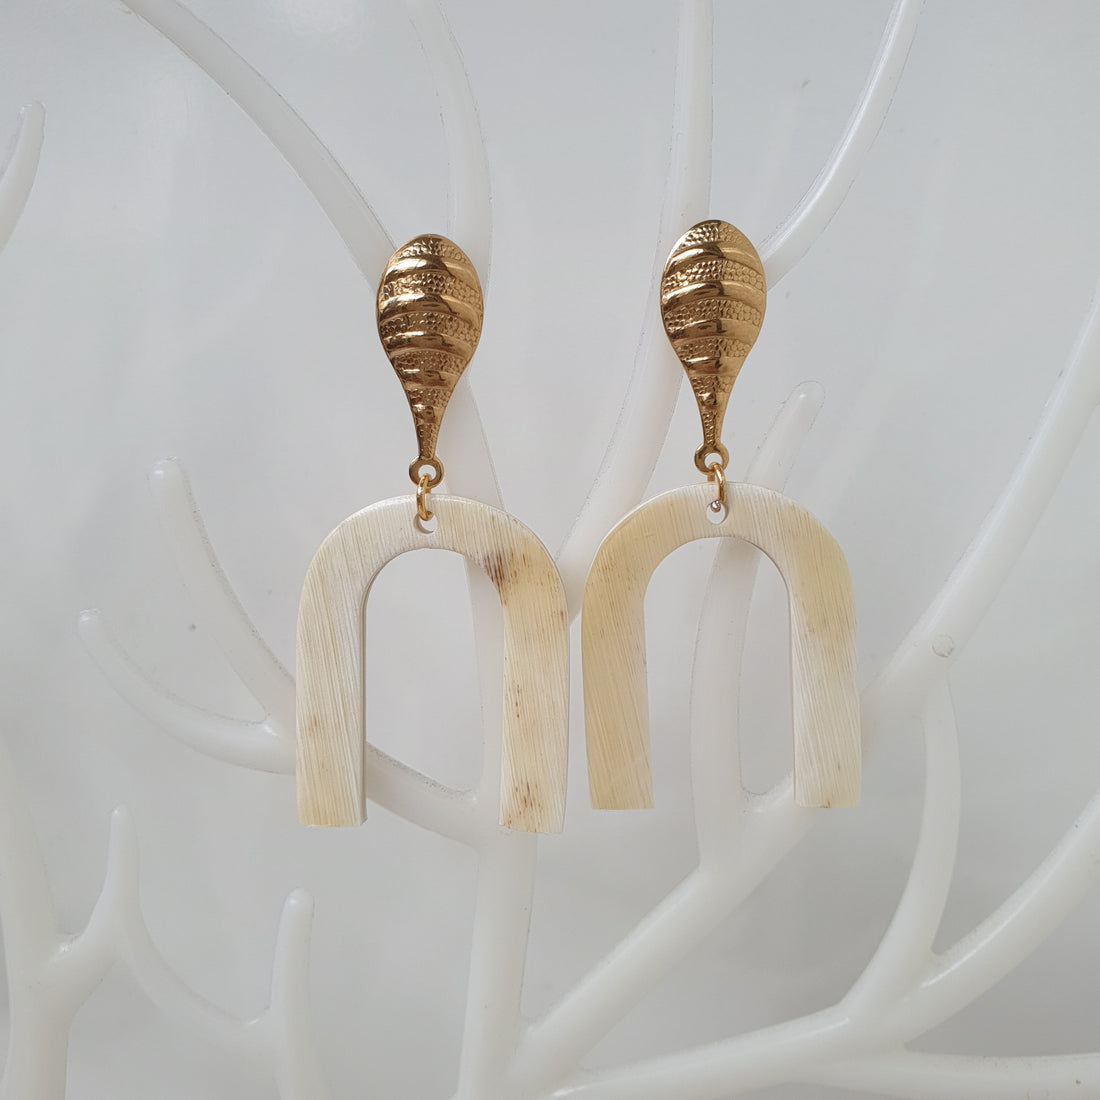 Gold luxury drop earrings are handmade with "H" shape and white color on white faux branches